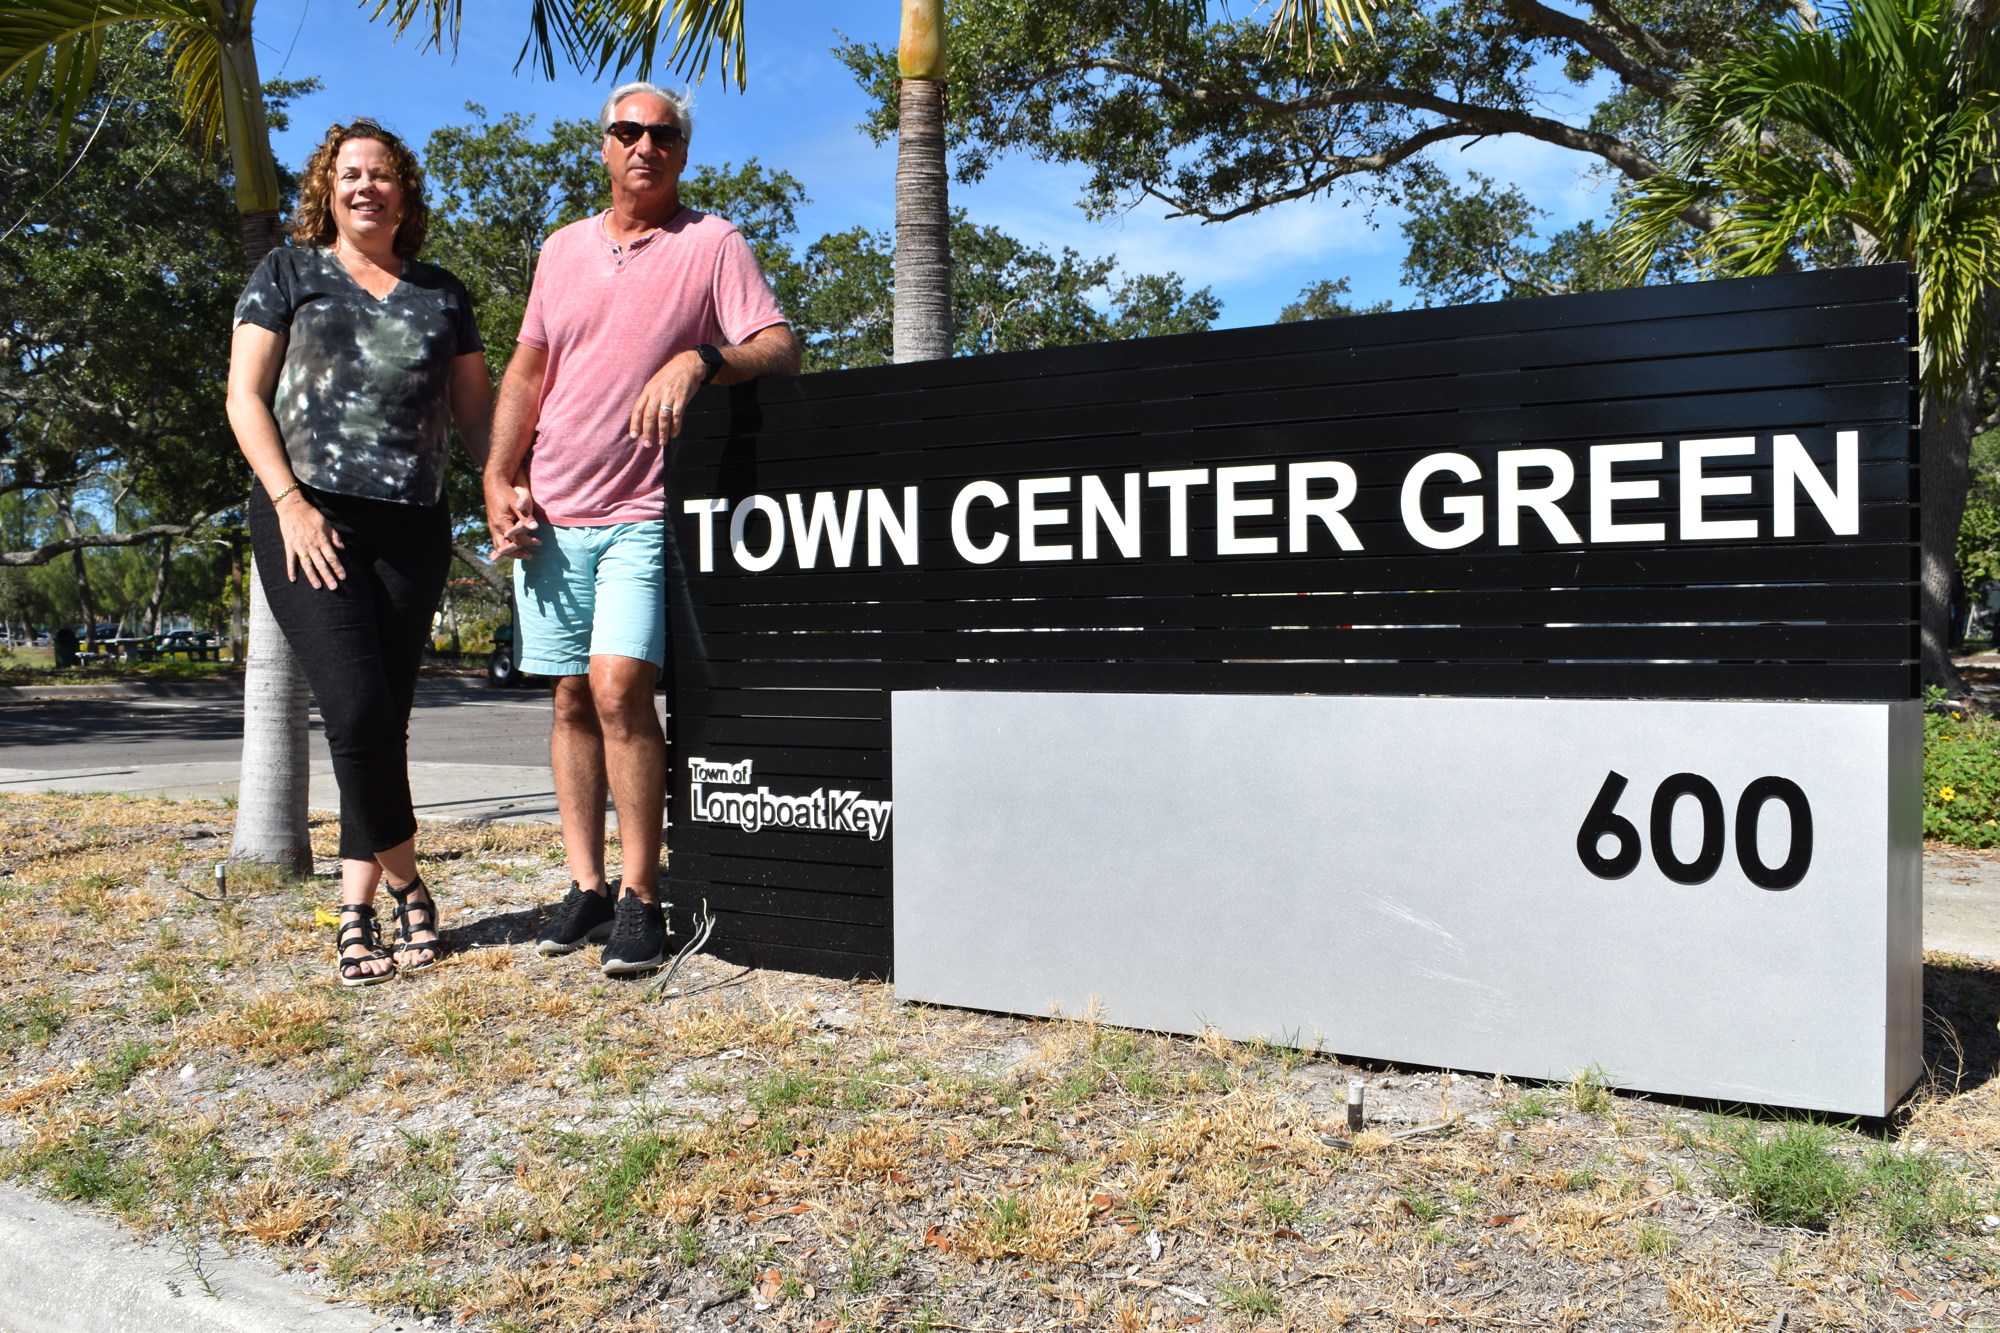 Paul and Sarah Karon agreed to donate up to $500,000 to the town of Longboat Key in exchange for the naming rights to the Town Center stage. File photo